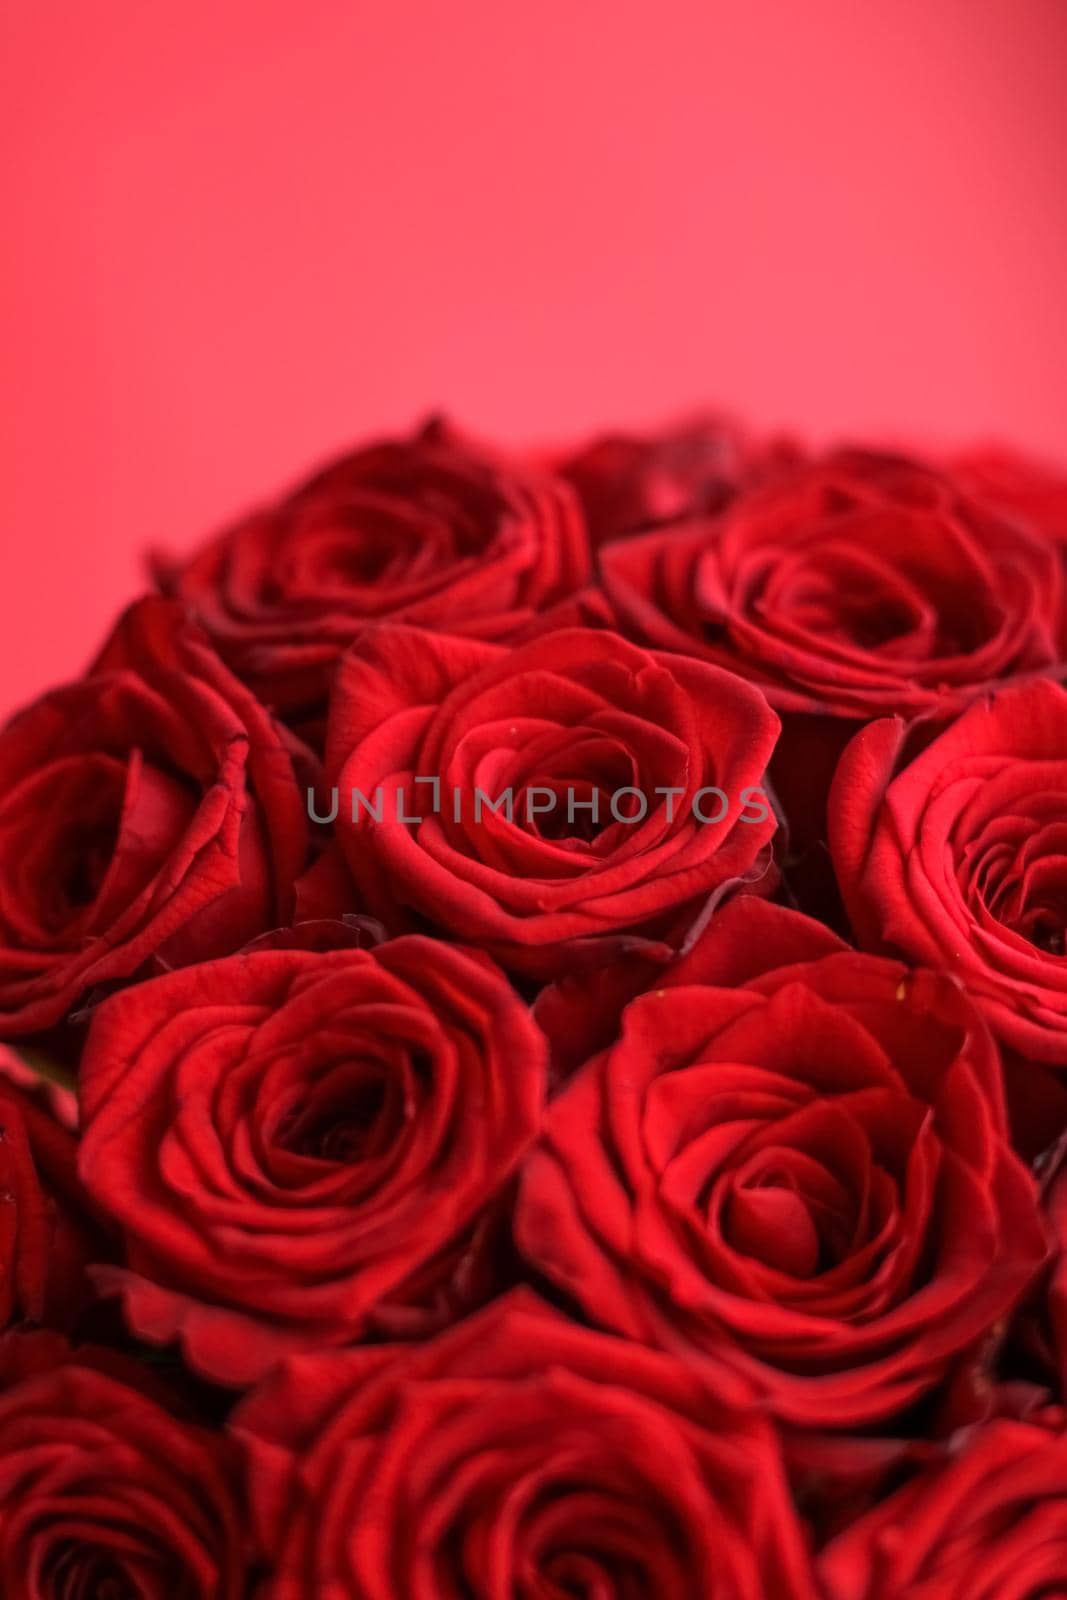 Blooming rose, flower blossom and Valentines Day gift concept - Gourgeous luxury bouquet of red roses, flowers in bloom as floral holiday background